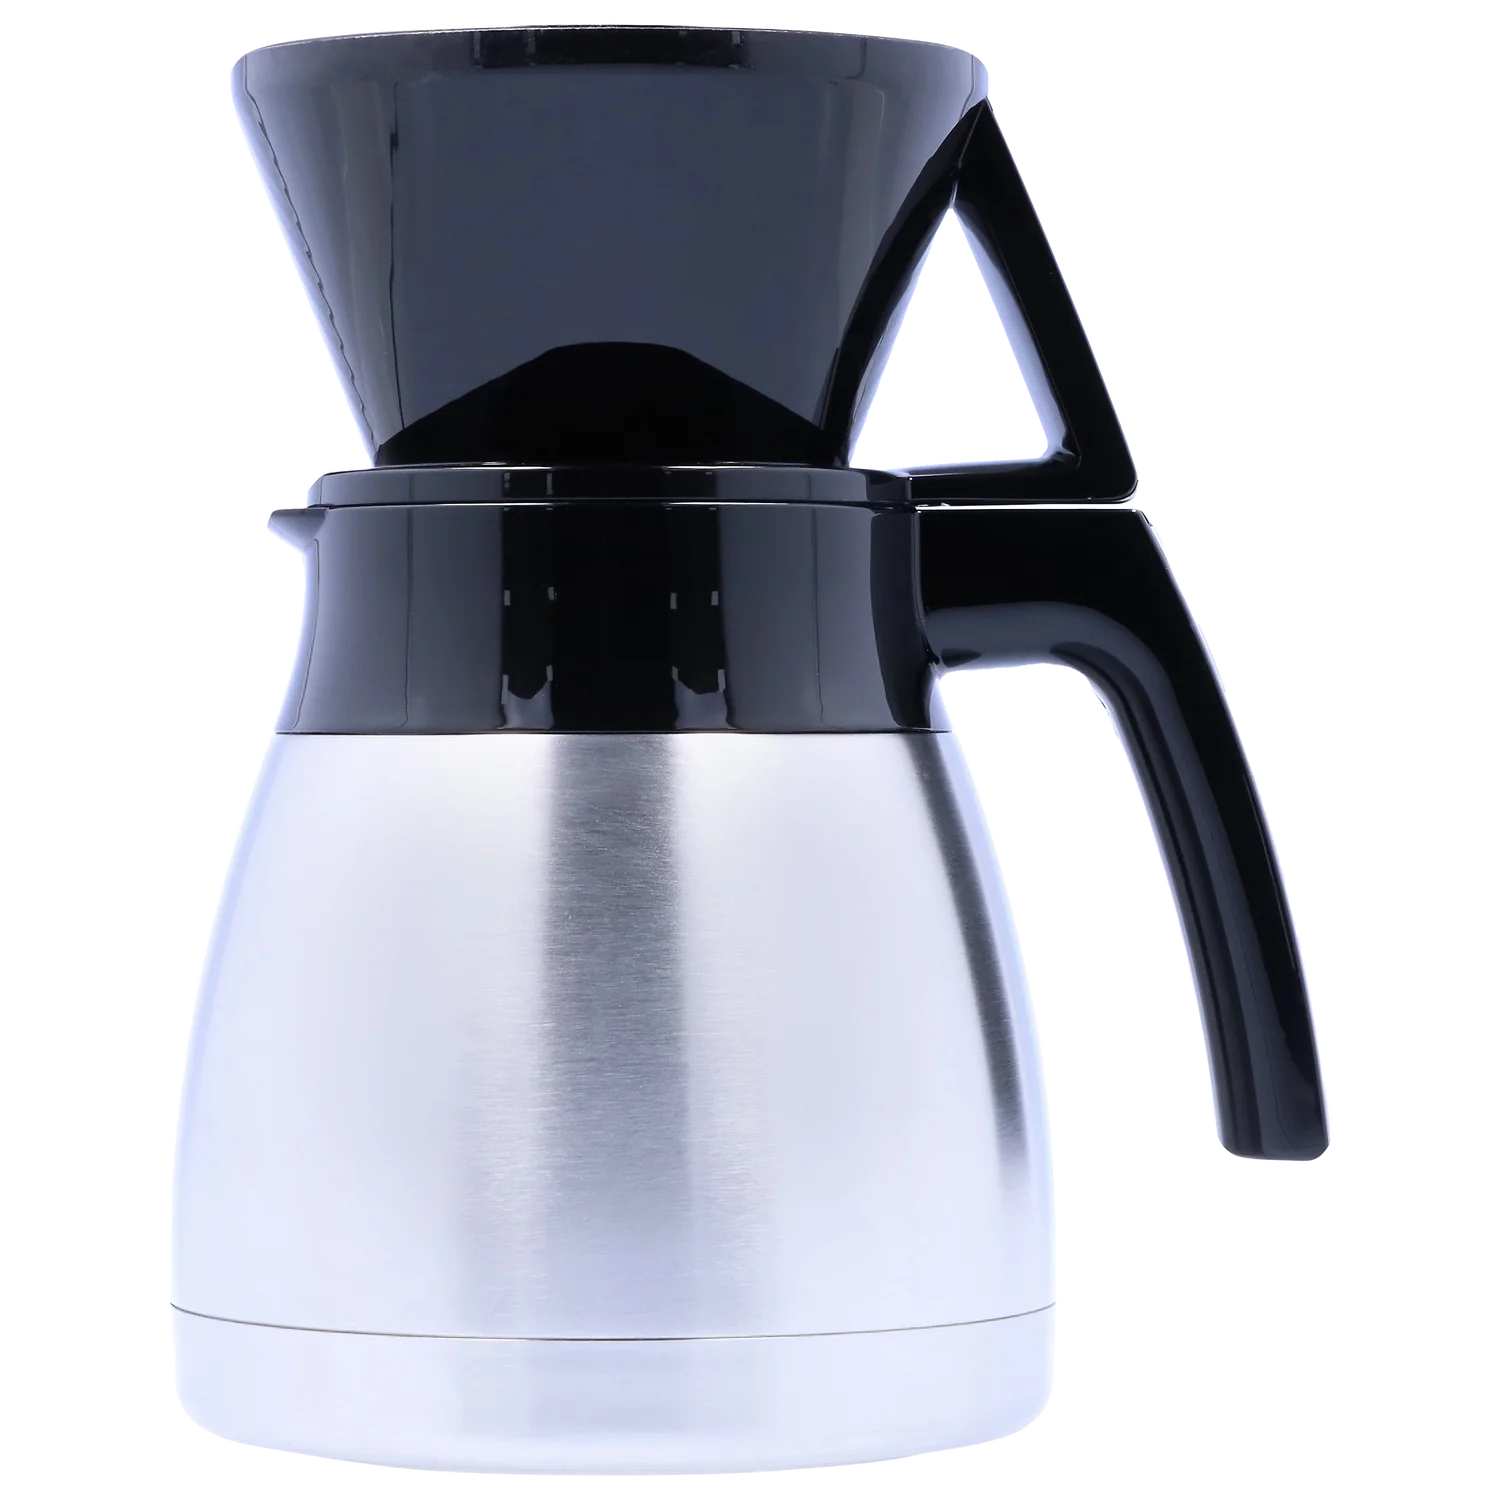 Mueller Juicer, $5+, Insulated Coffee Carafe, $14+ & More